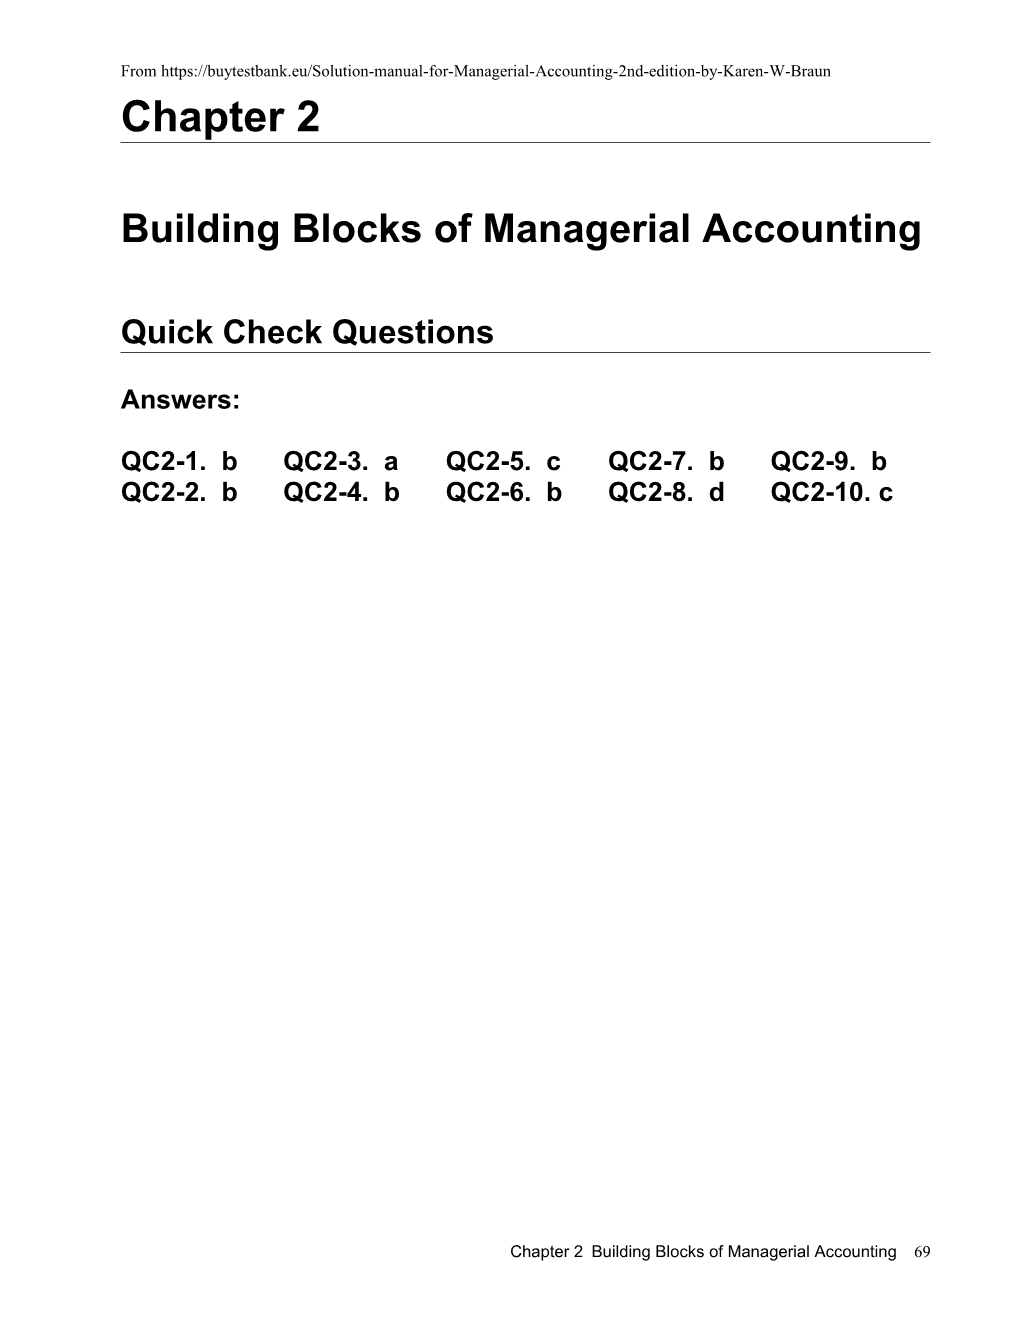 Building Blocks of Managerial Accounting s1